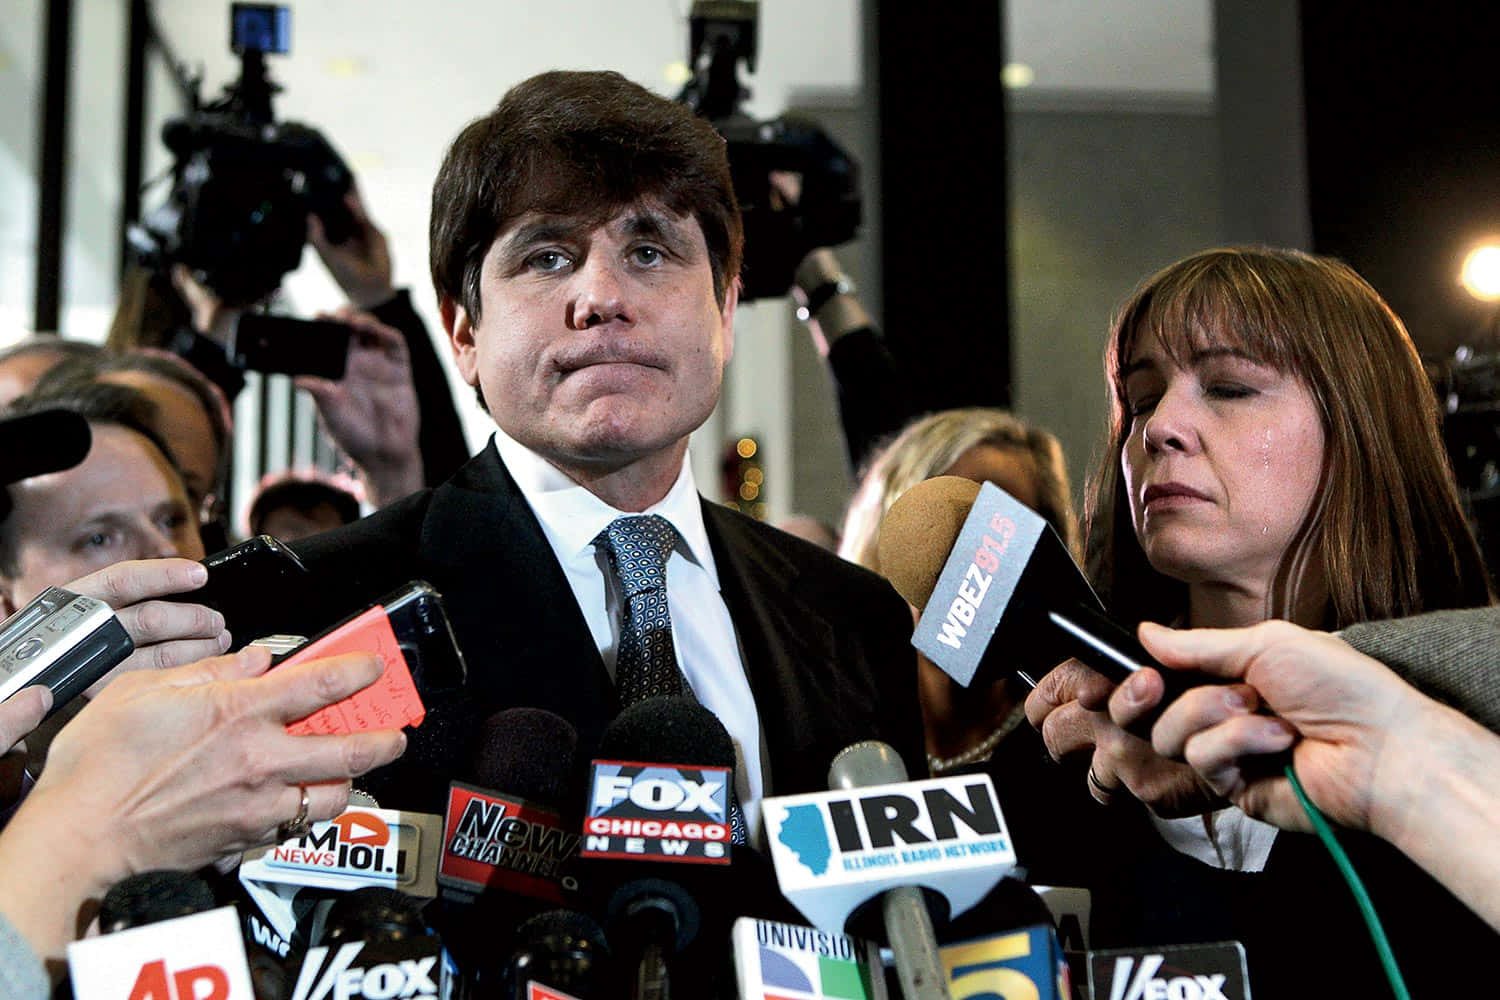 Former Illinois Governor Rod Blagojevich Engulfed by Local Media Reporters Wallpaper